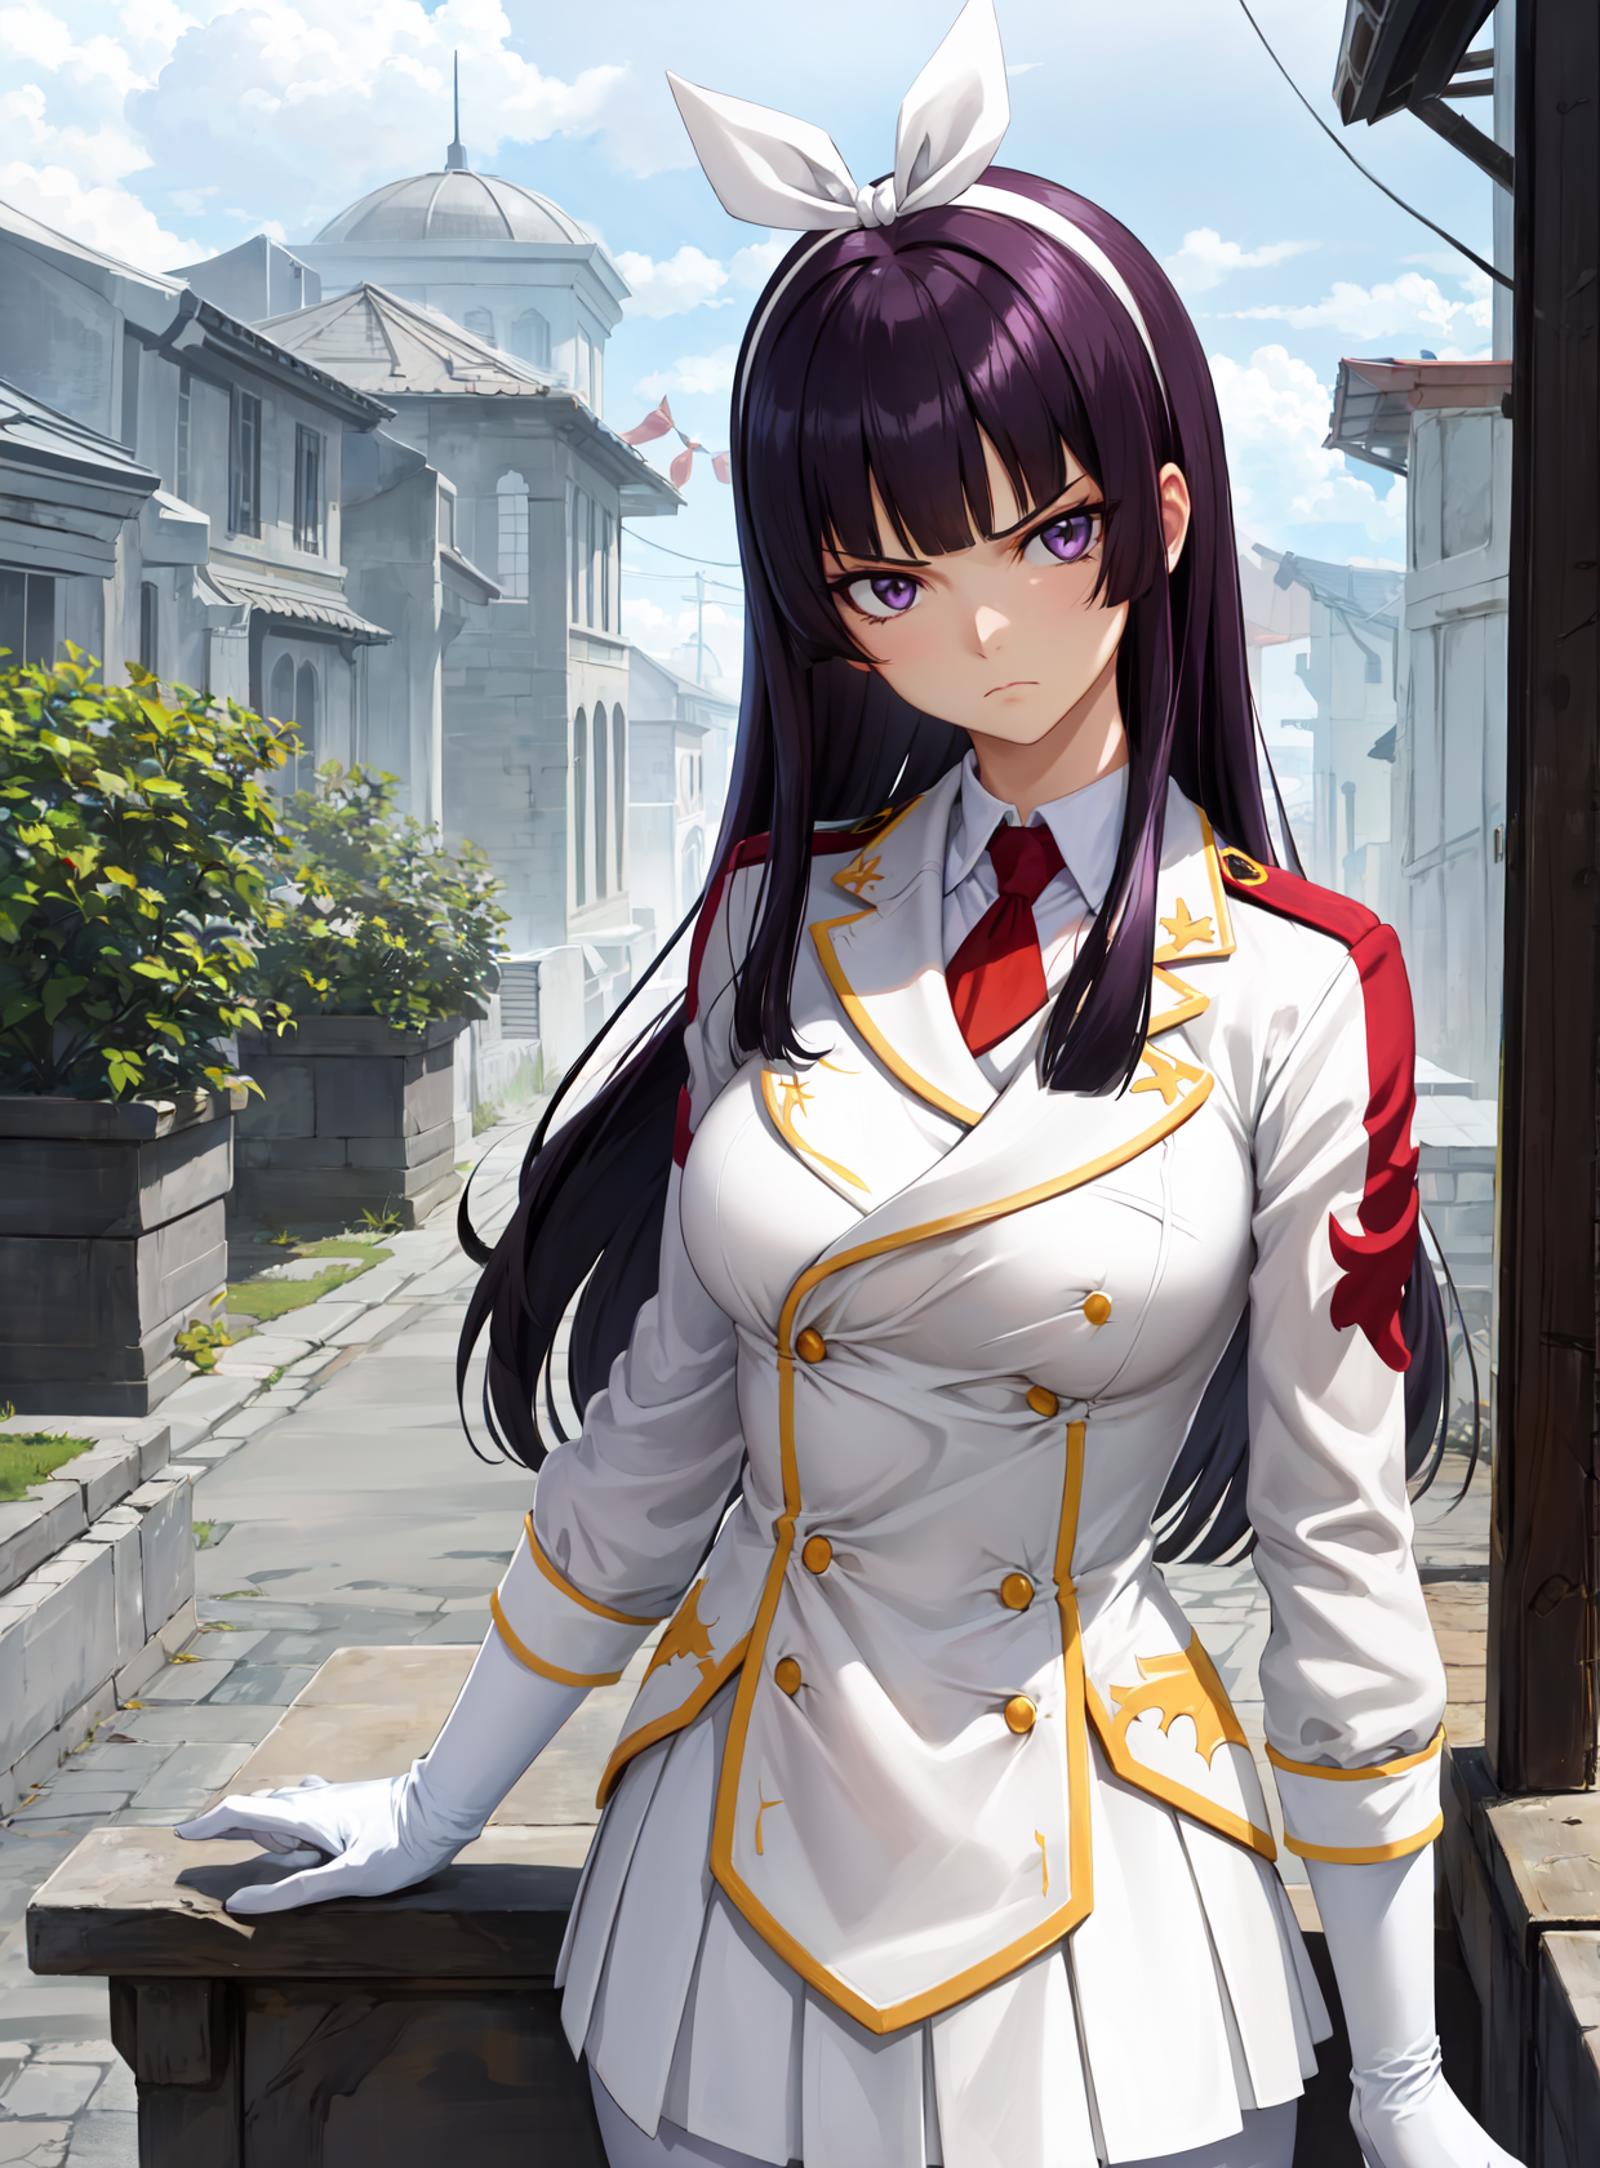 Anime character in a white and red dress standing in front of a building.